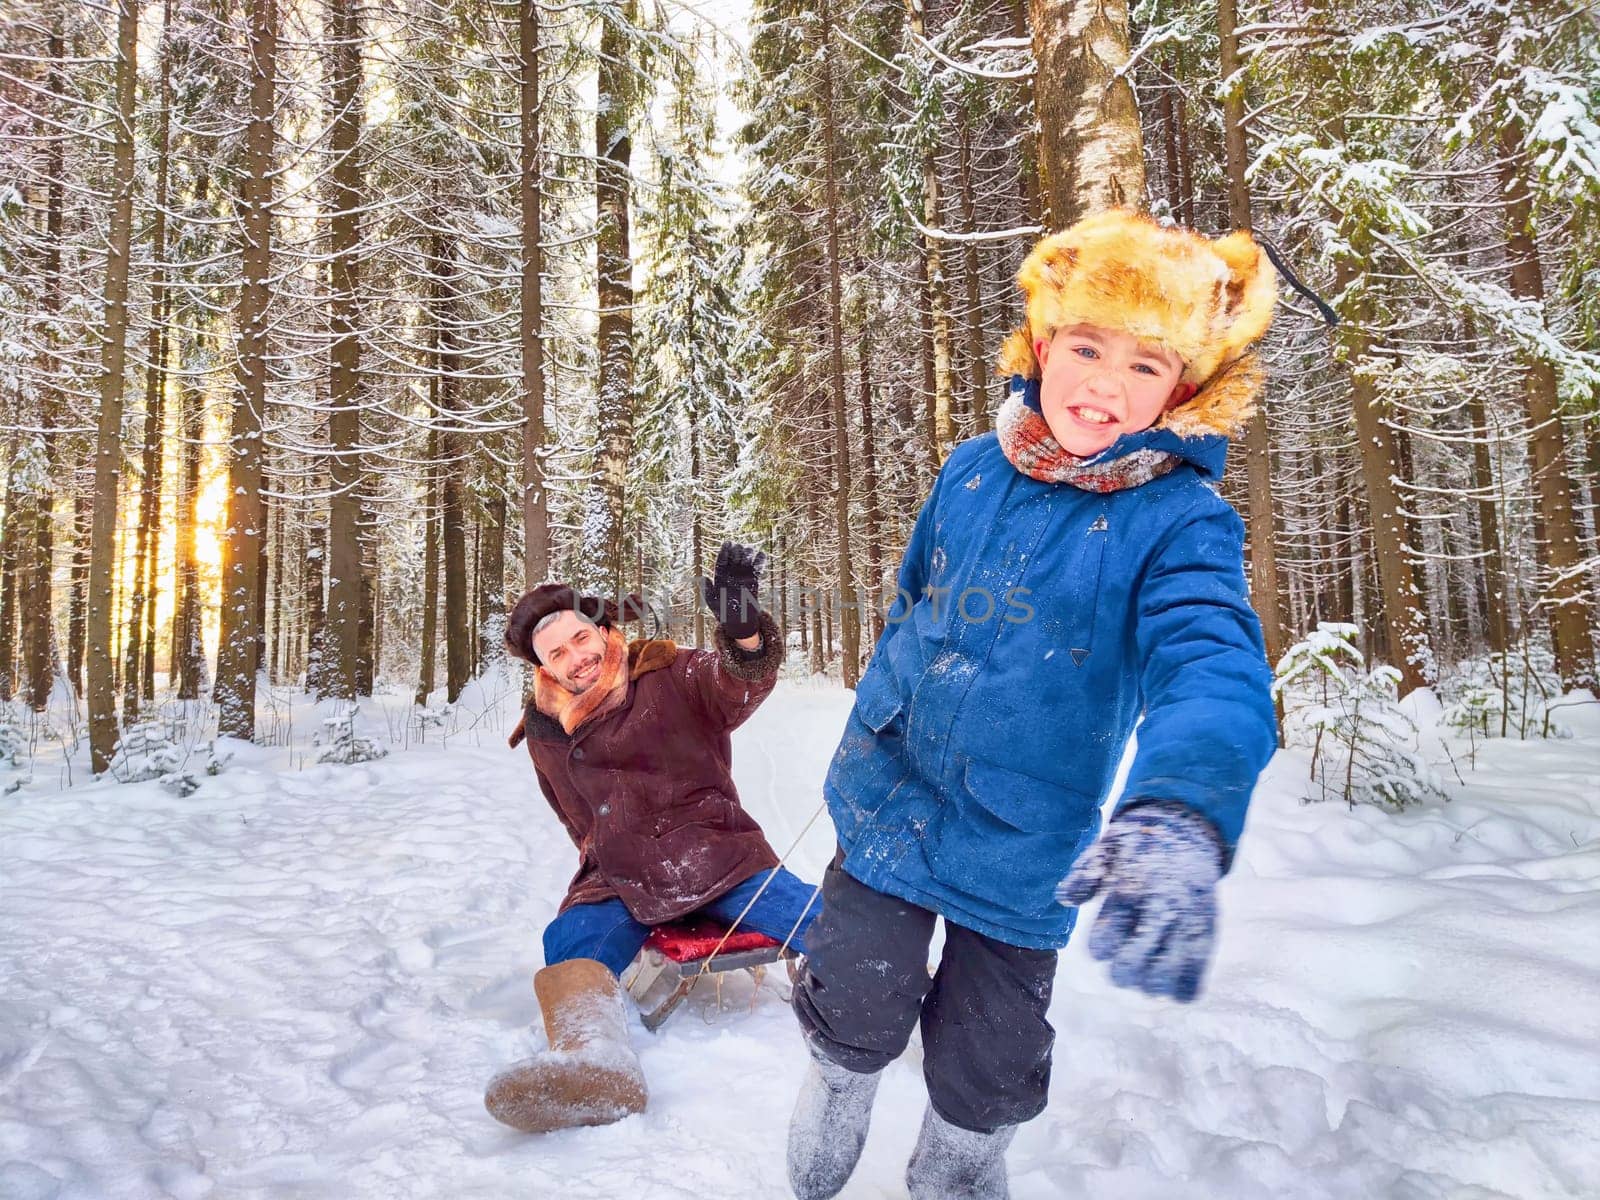 Father and son sledding, having fun, walking in snow nature. Photo shoot in stylized clothes of the USSR. Hat with earflaps. Happy dad, teenager child playing in winter park, forest in holidays by keleny